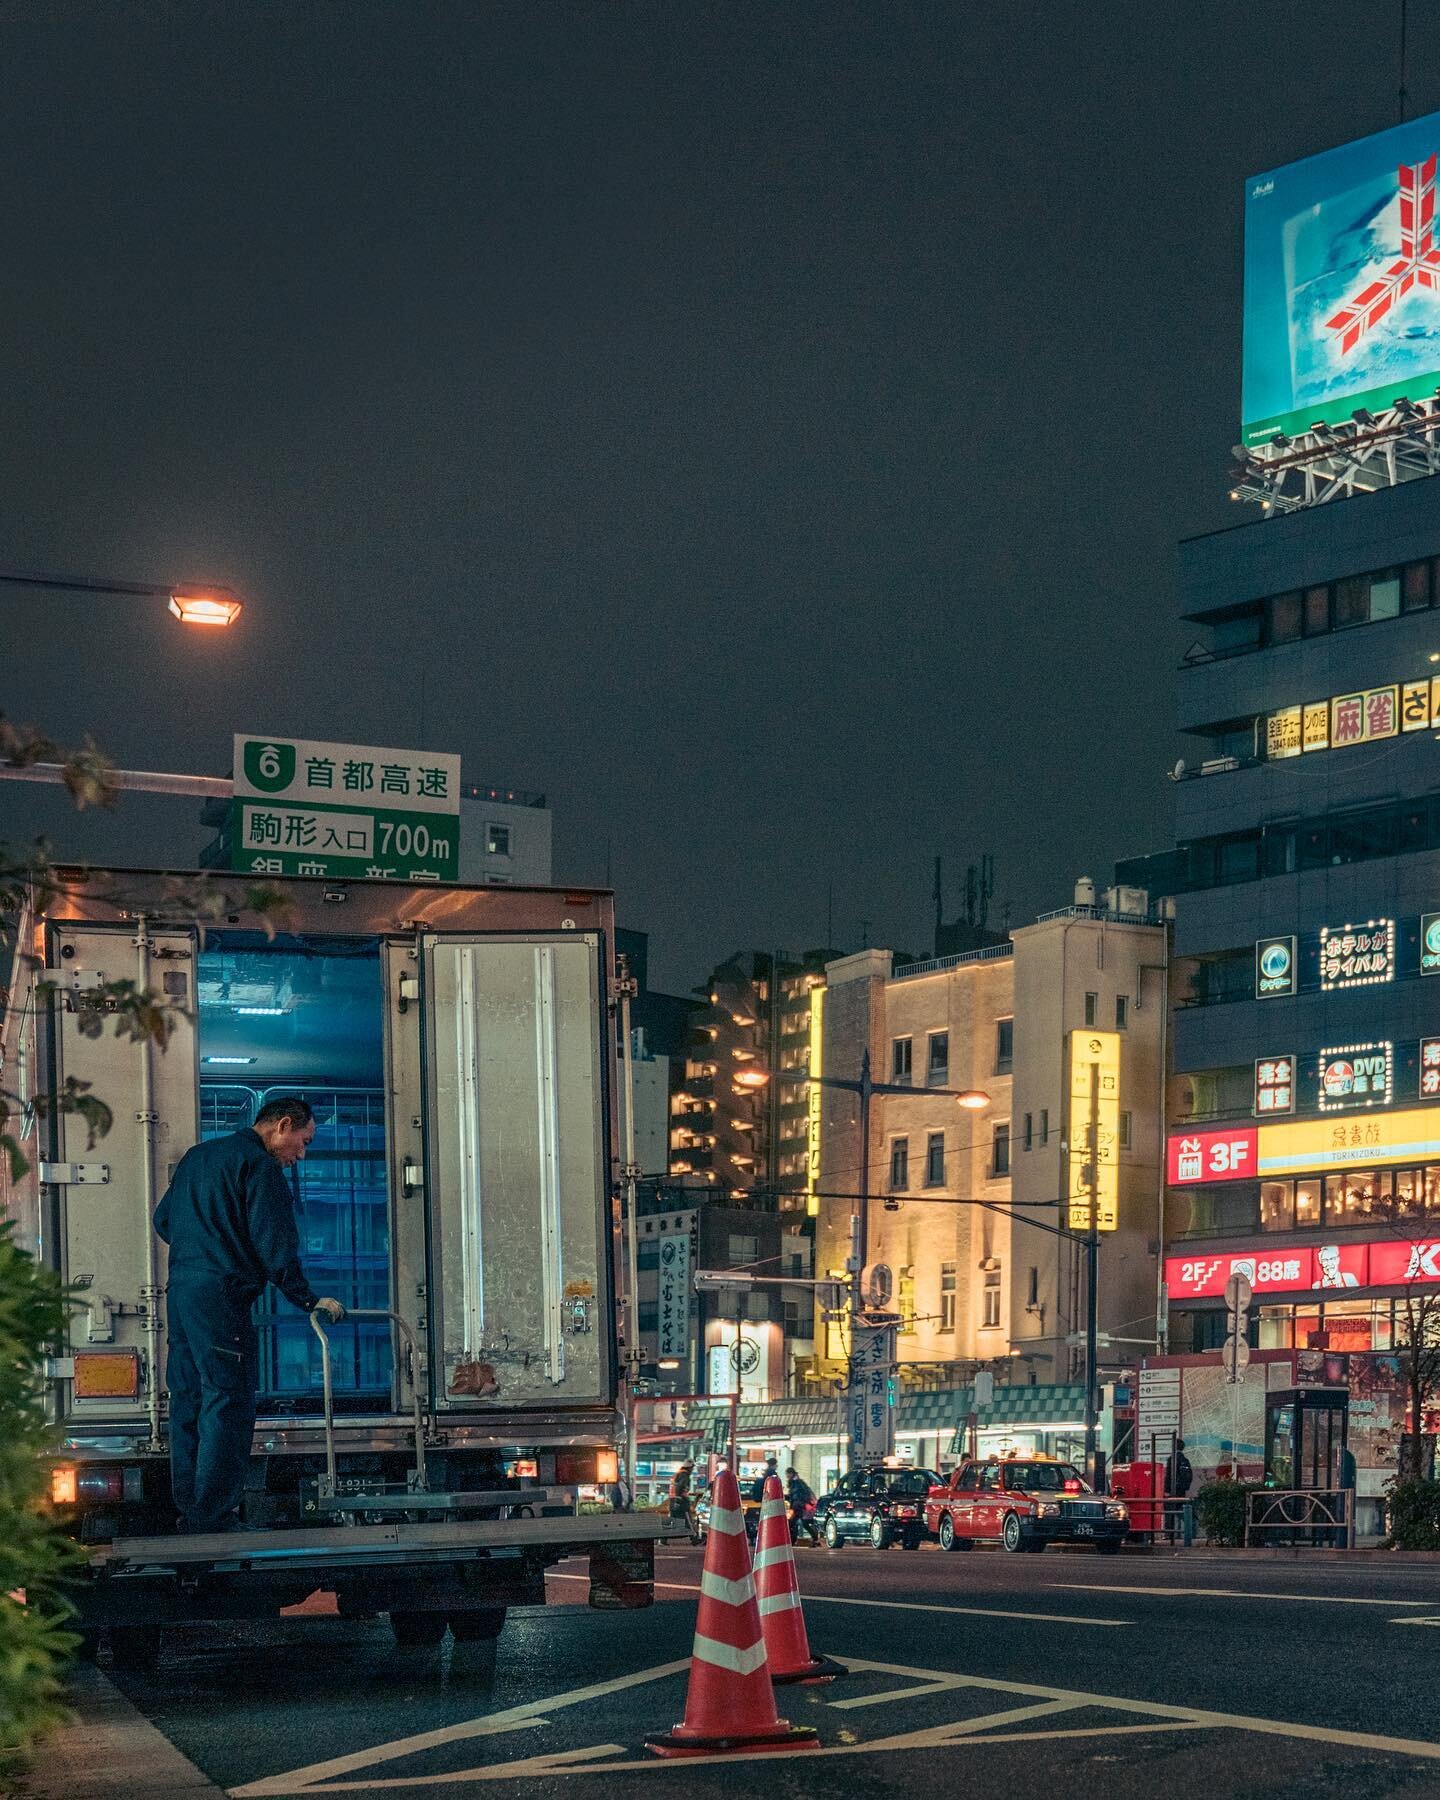 A favourite from my first night in Tokyo. We were on our way back from Senso-ji and chanced upon this man in his lorry.

Waited for a bit til he was coming down, which allowed me to fine tune my composition. 😁

Swipe ⬅️ further to see the 2.35:1 ver